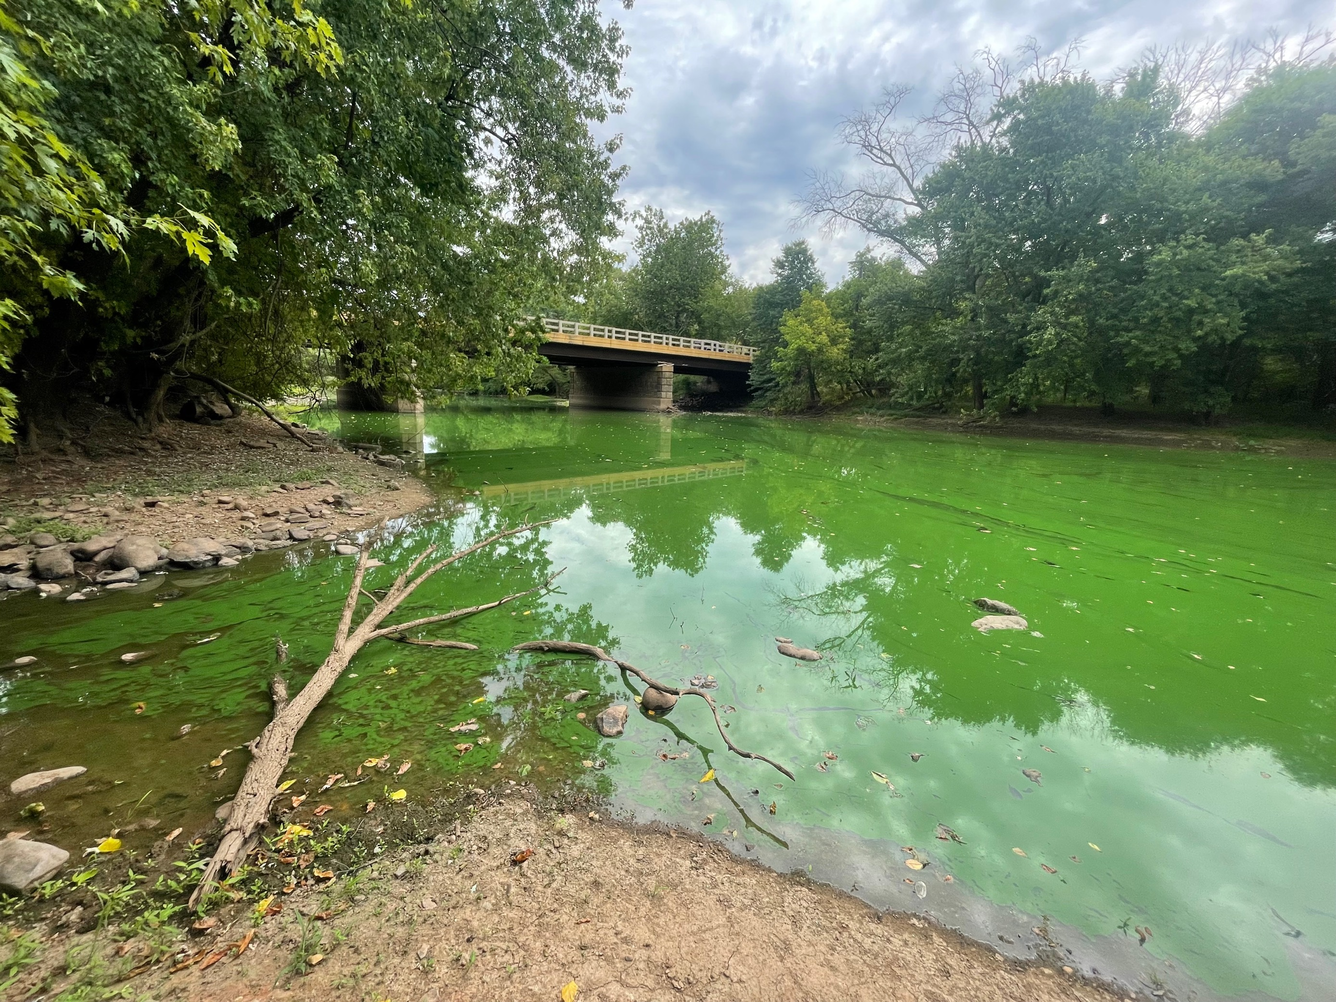 Photograph of the Millstone river looking at a bridge and the river is bright green and choked with algae. Deciduous trees line the banks of the river